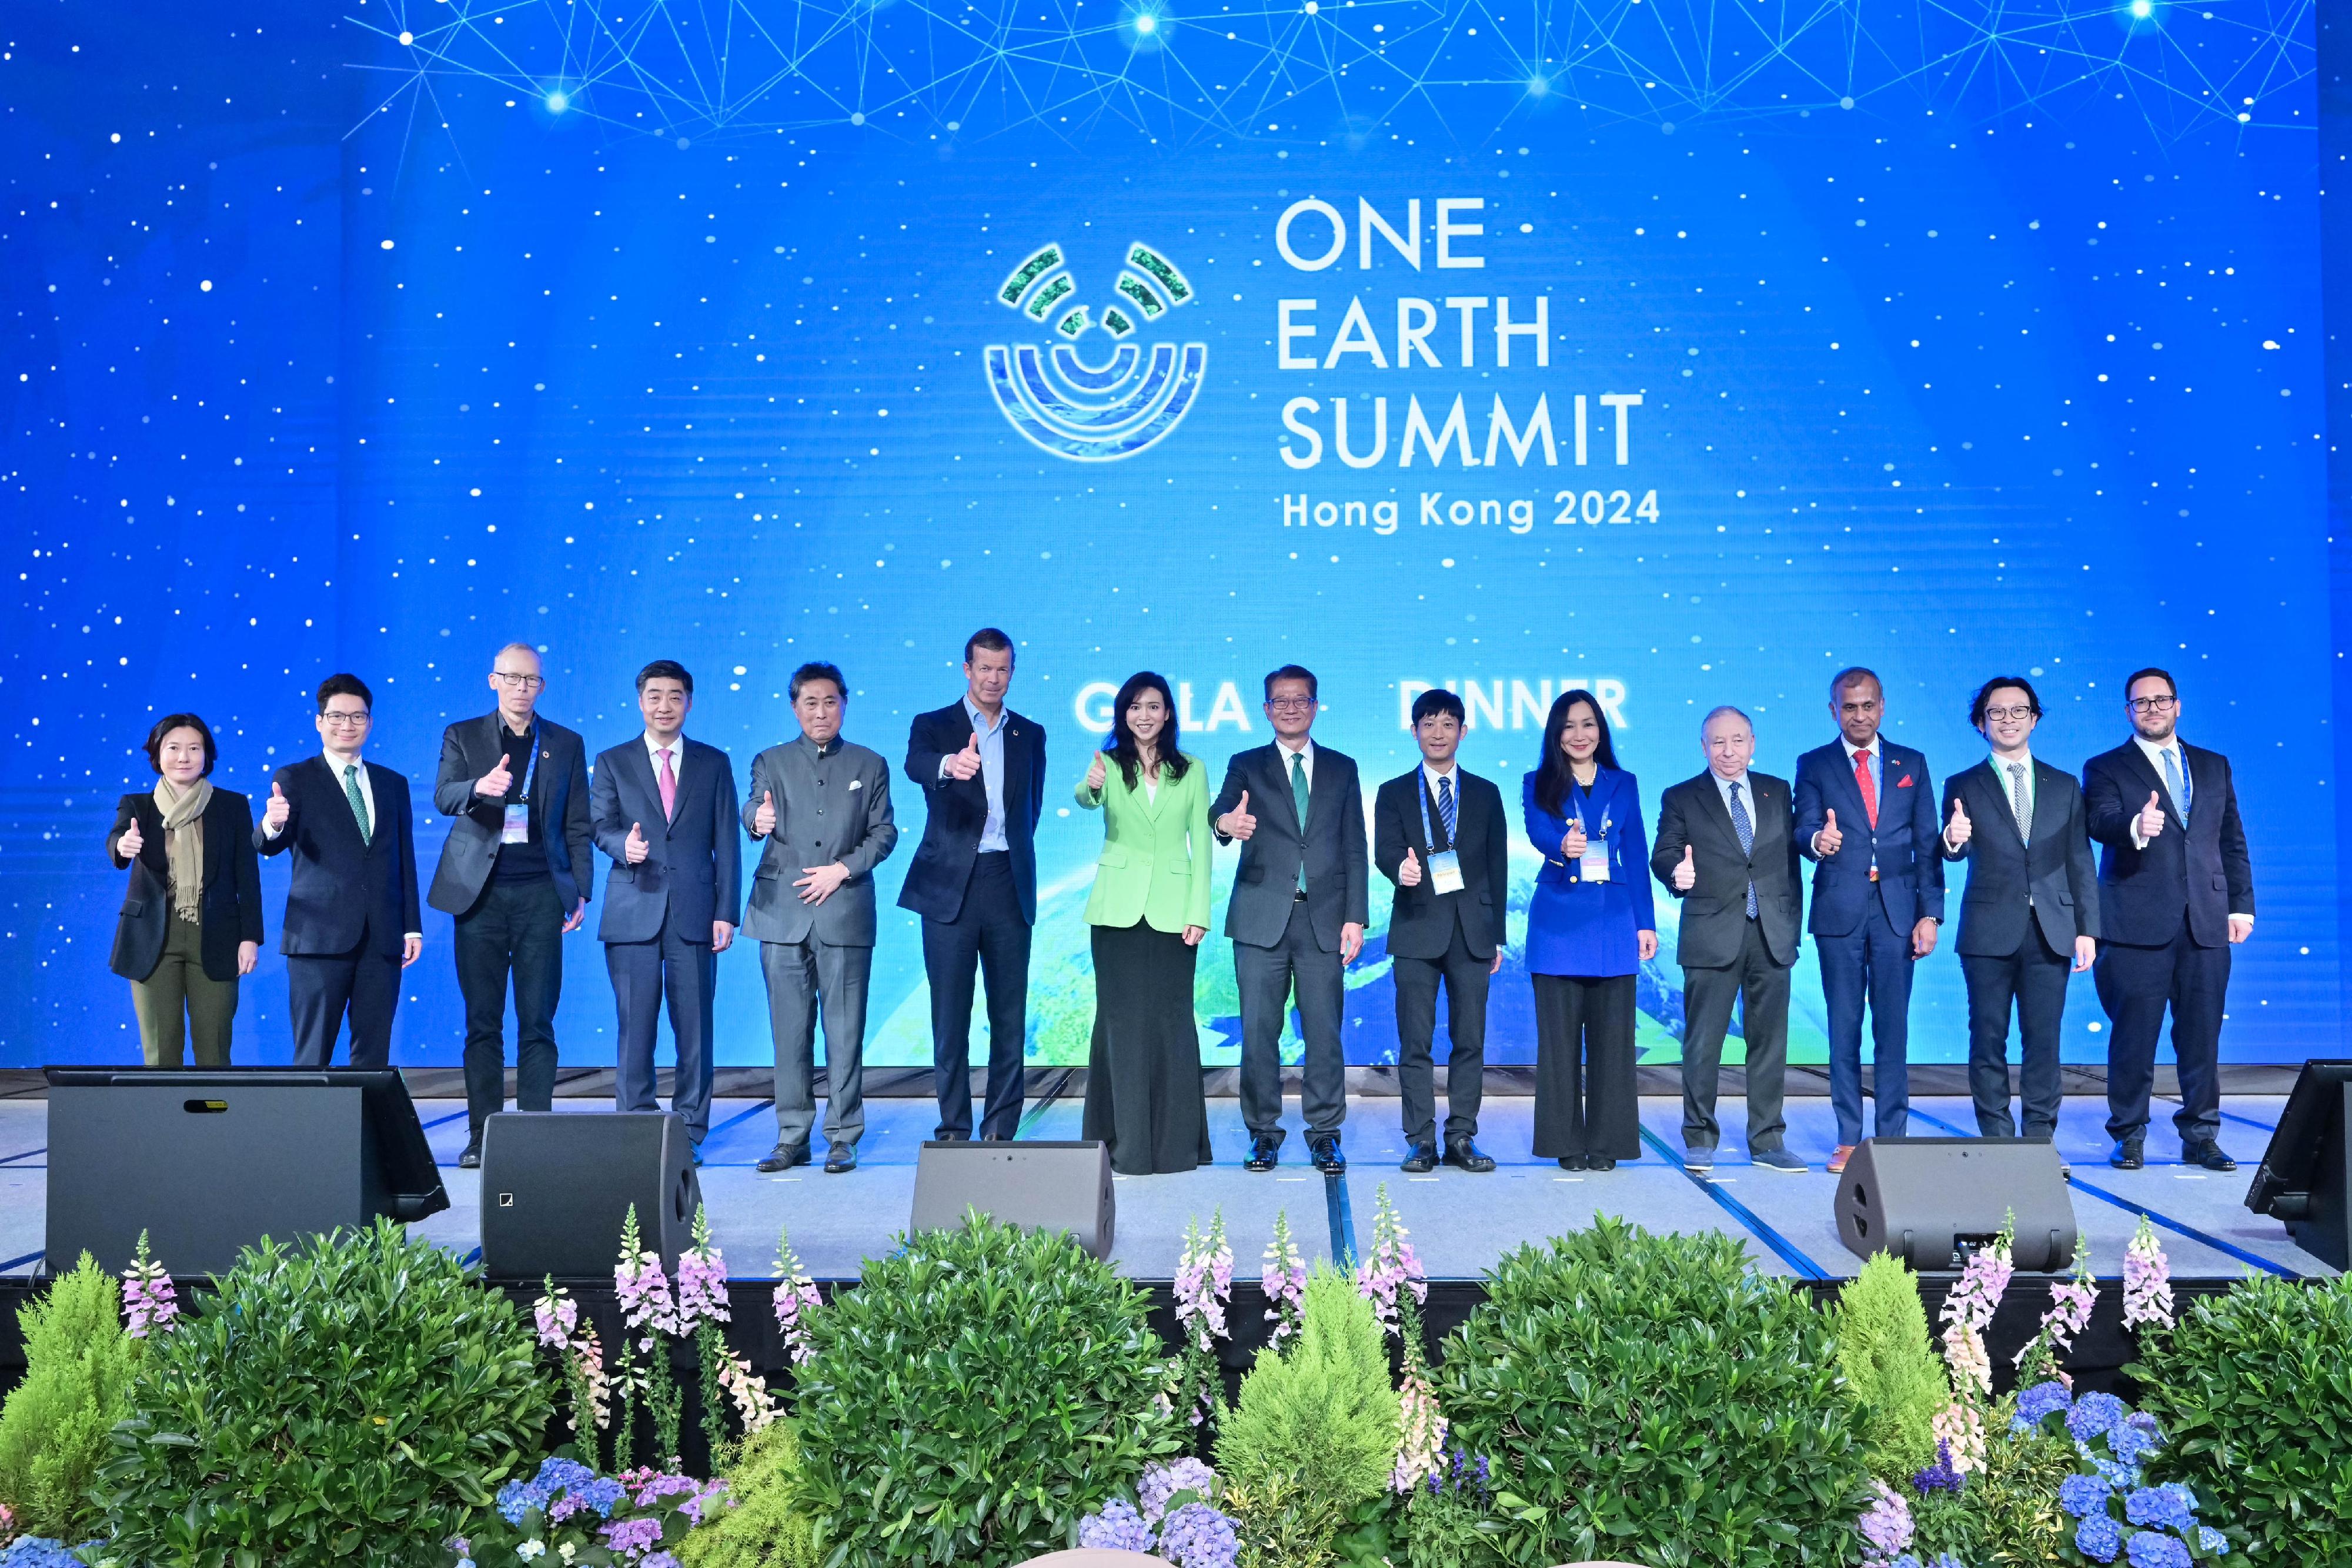 The Institute of Sustainability and Technology (IST) held the One Earth Summit Gala Dinner this evening (March 25). Photo shows (from fifth right) the Managing Director of the Centre for Nature and Climate of the World Economic Forum, Ms Gim Huay Neo; the Deputy Director-General of the Department of Economic Affairs of the Liaison Office of the Central People's Government in the Hong Kong Special Administrative Region, Mr Tan Yabo; the Financial Secretary, Mr Paul Chan; and the Founder of the IST, Professor Poman Lo, with other guests at the gala dinner.